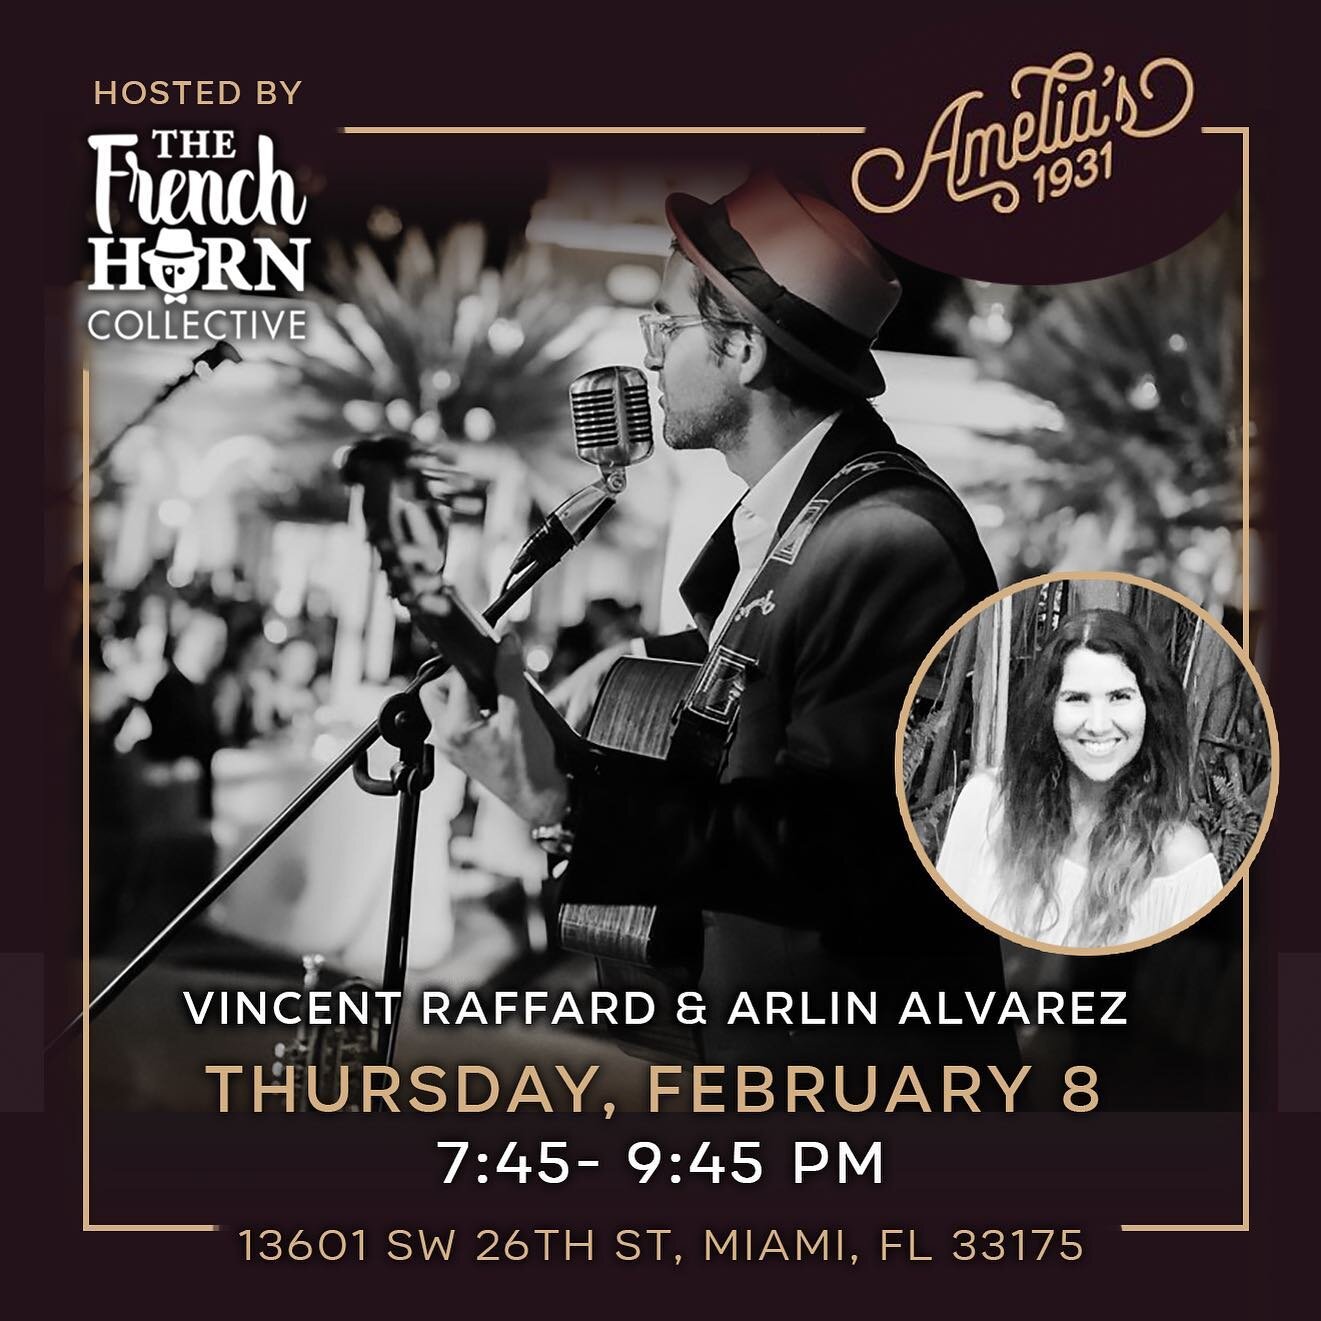 @amelias1931 this Thursday at 7.30pm great food and people. We will be playing with @mgonzalezmusic and @arlinthesinger 👉🏻 Reservations available at amelias1931.com 

📍13601 SW 26th St. 
Miami FL 33175

#livemusic #thefrenchhorncollective #vincent